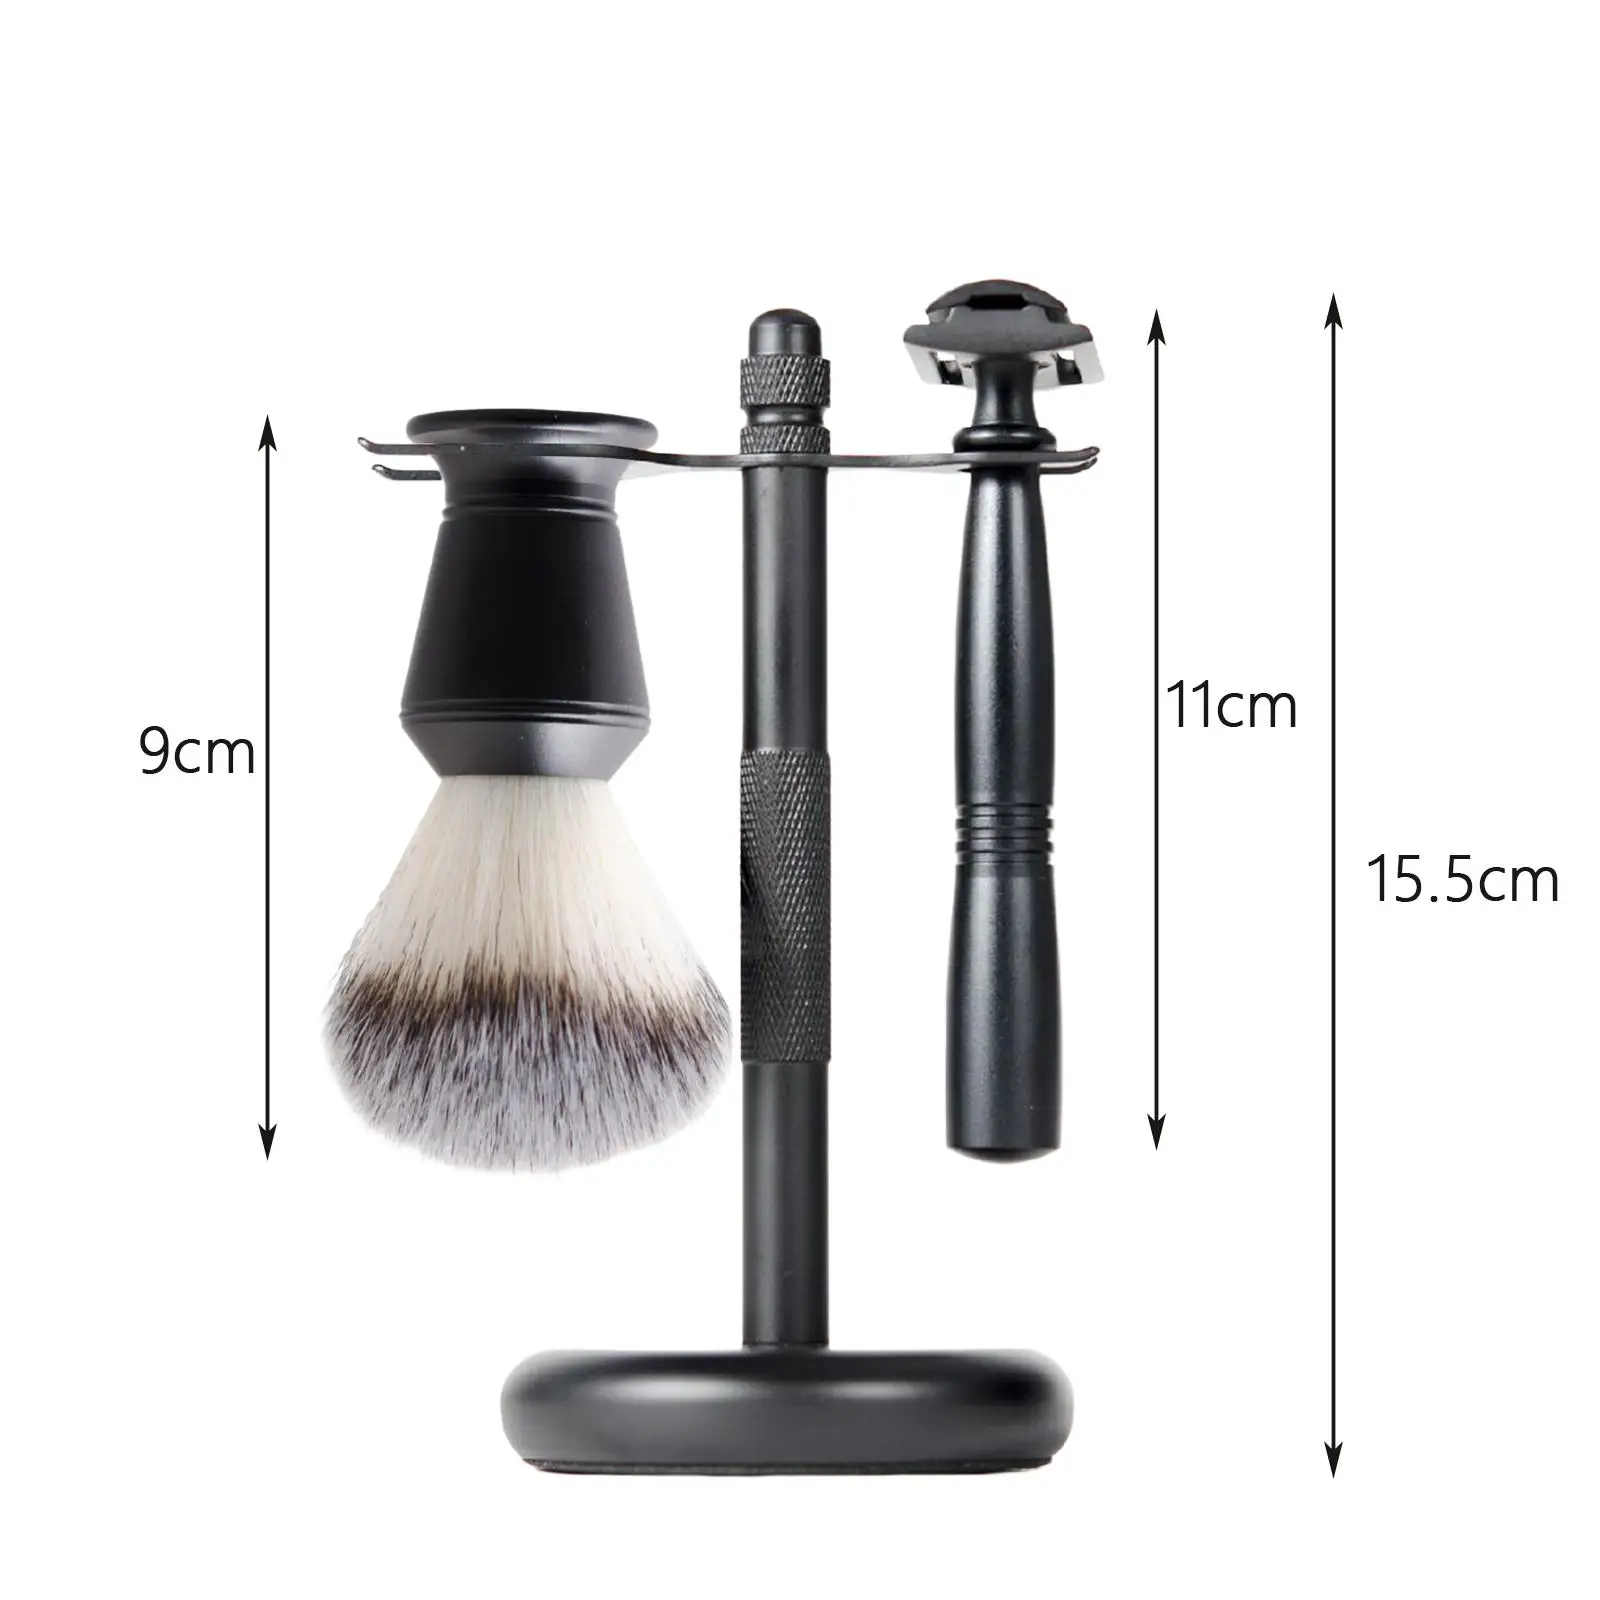 3Pcs Shaving Set Black Color Shave Accessory Premium Father`s Day Gifts